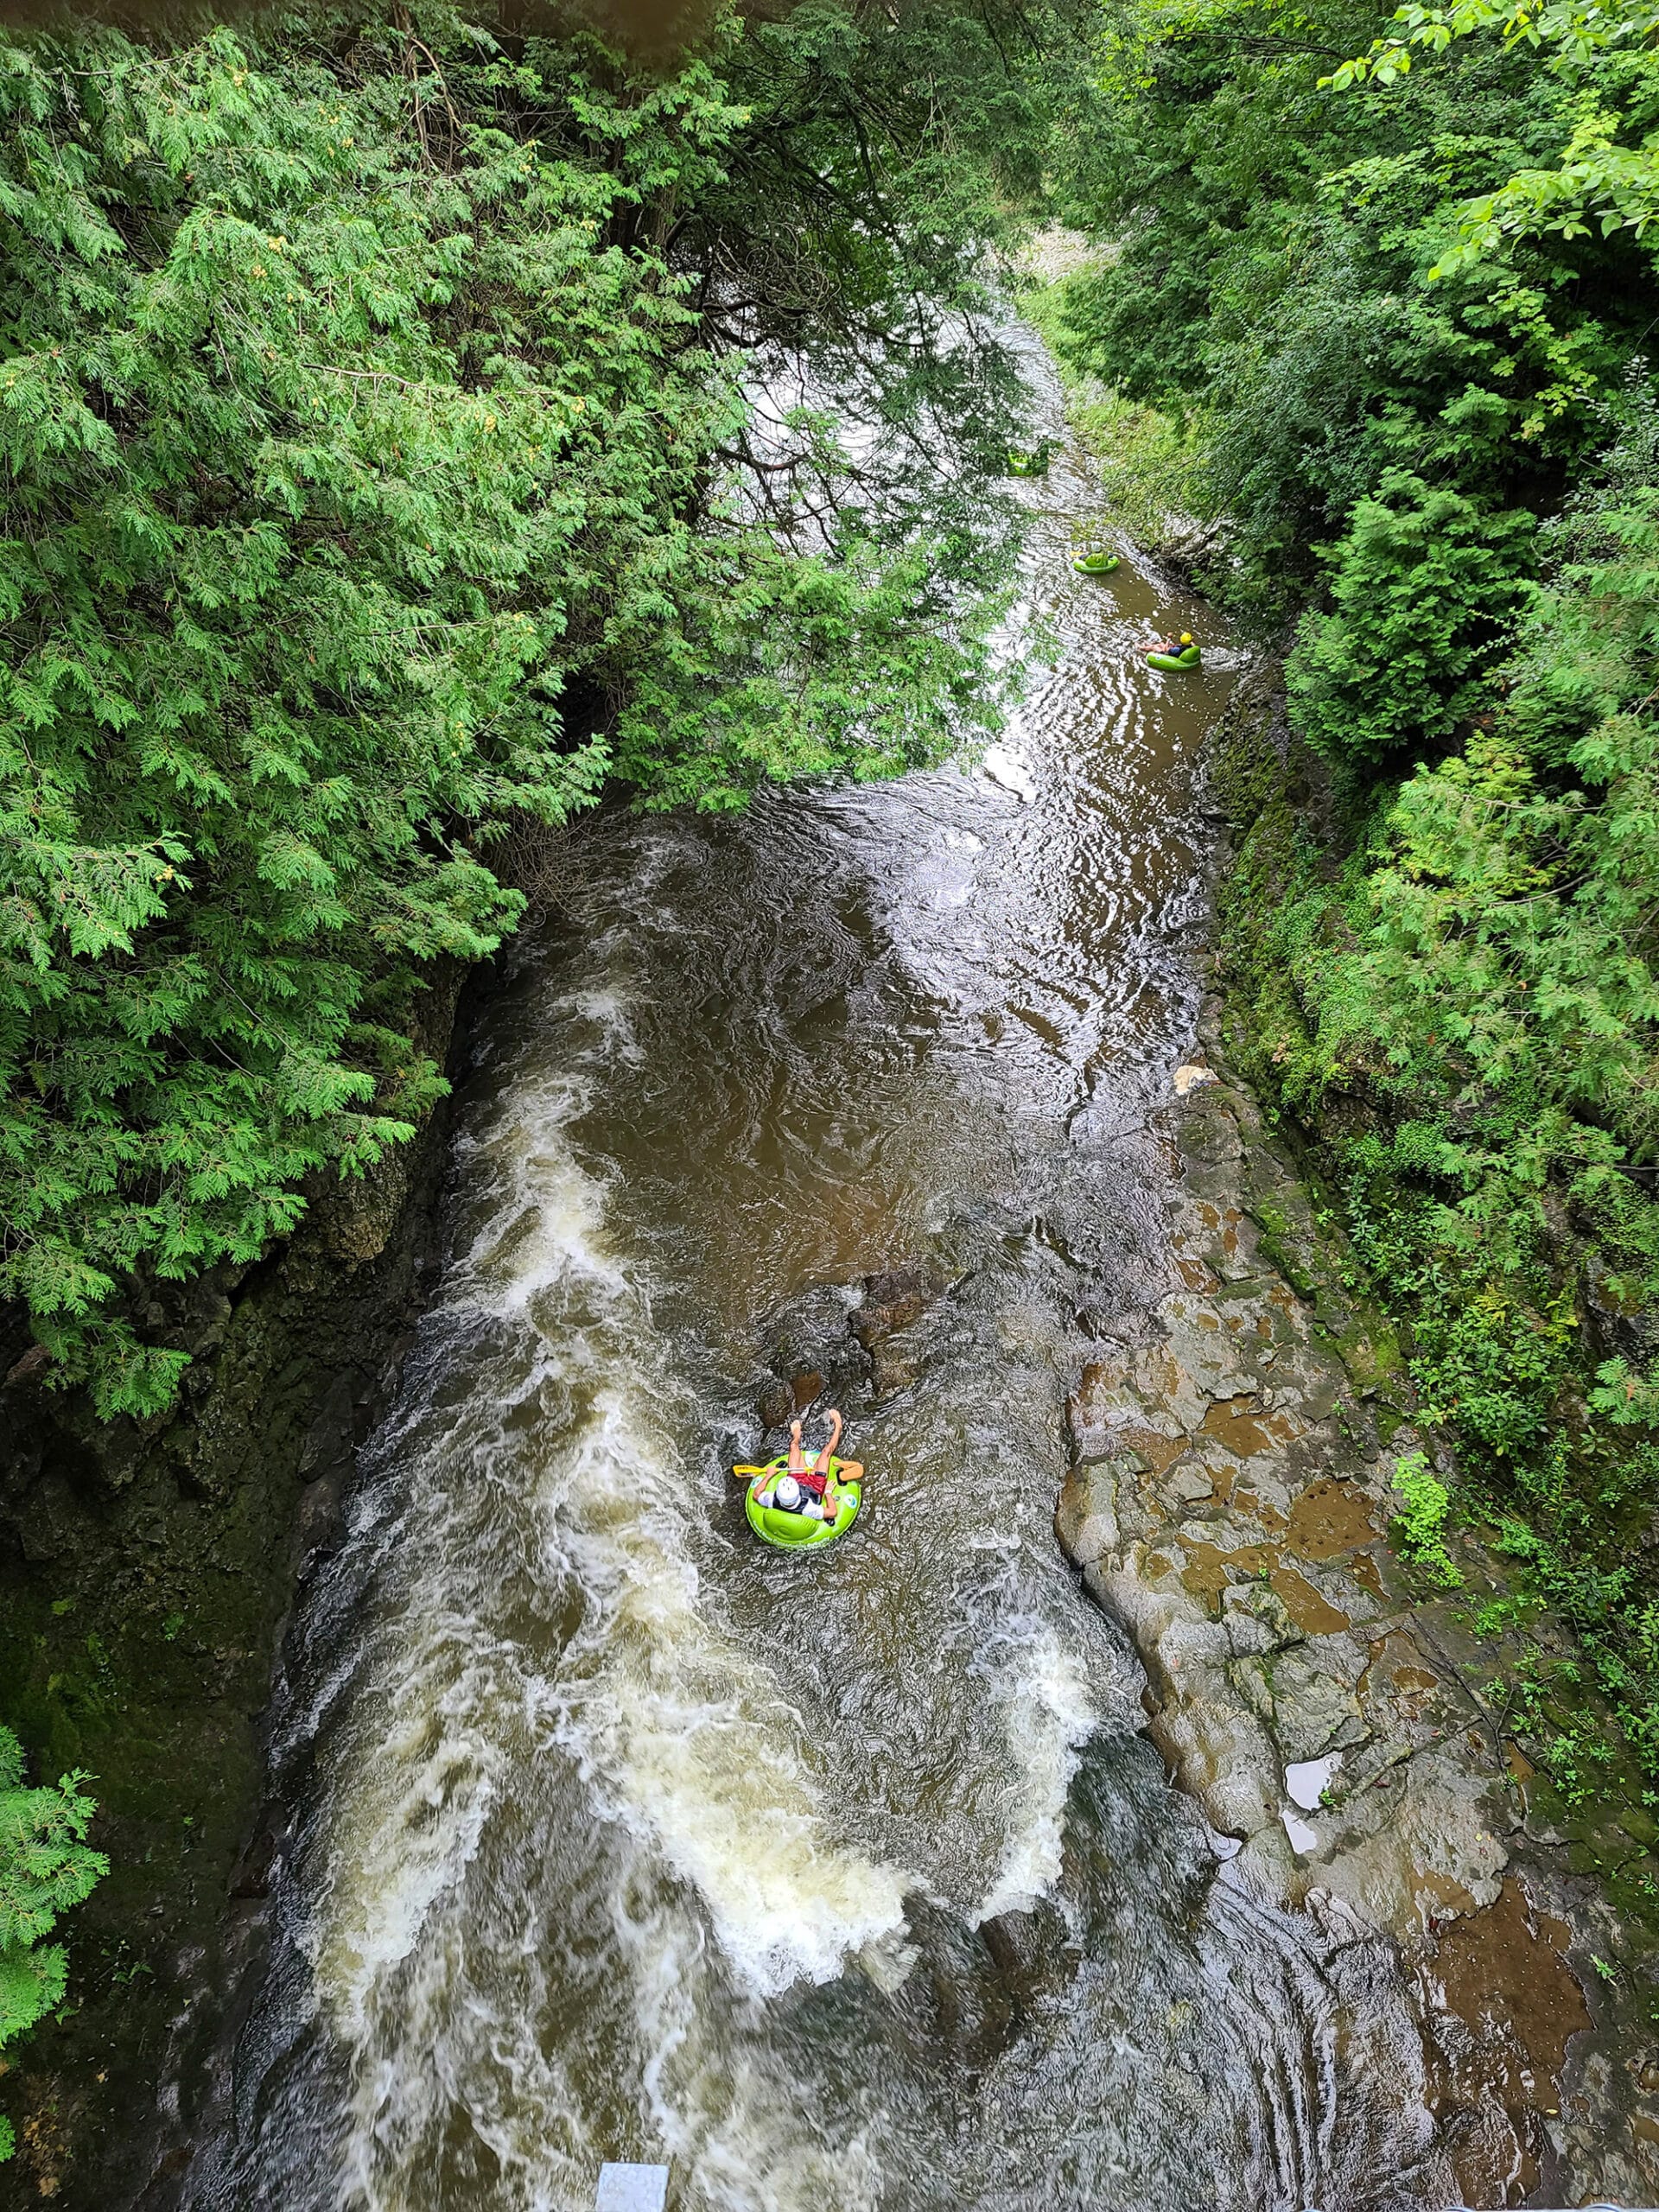 Overhead view of someone tubing through Elora Gorge on a bright green inner tube.